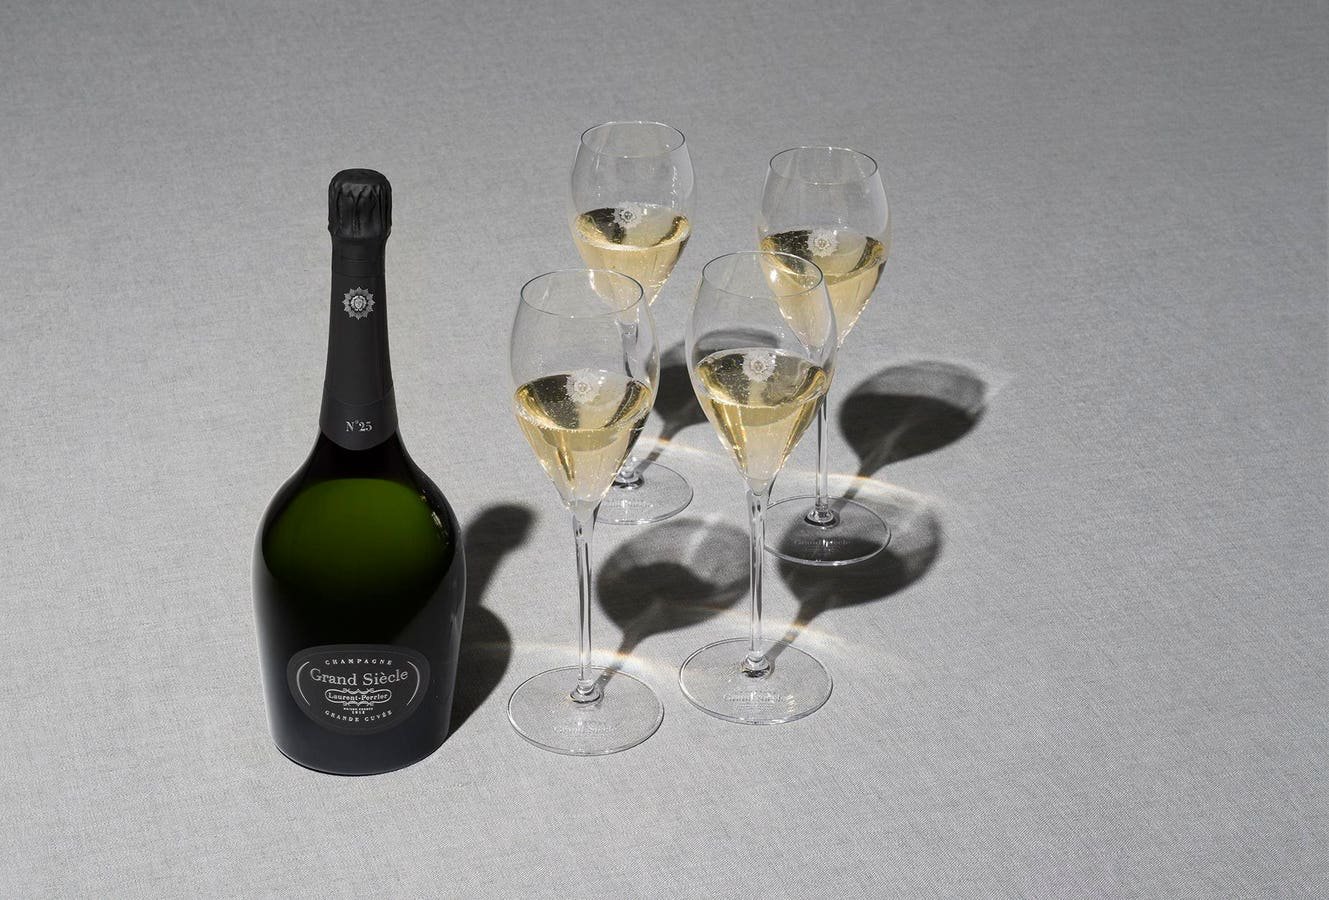 Laurent-Perrier Cuvée Grand Siècle Iteration #25 Brut Champagne | Exquisite Wine & Alcohol Gift Delivery Toronto Canada | Vyno